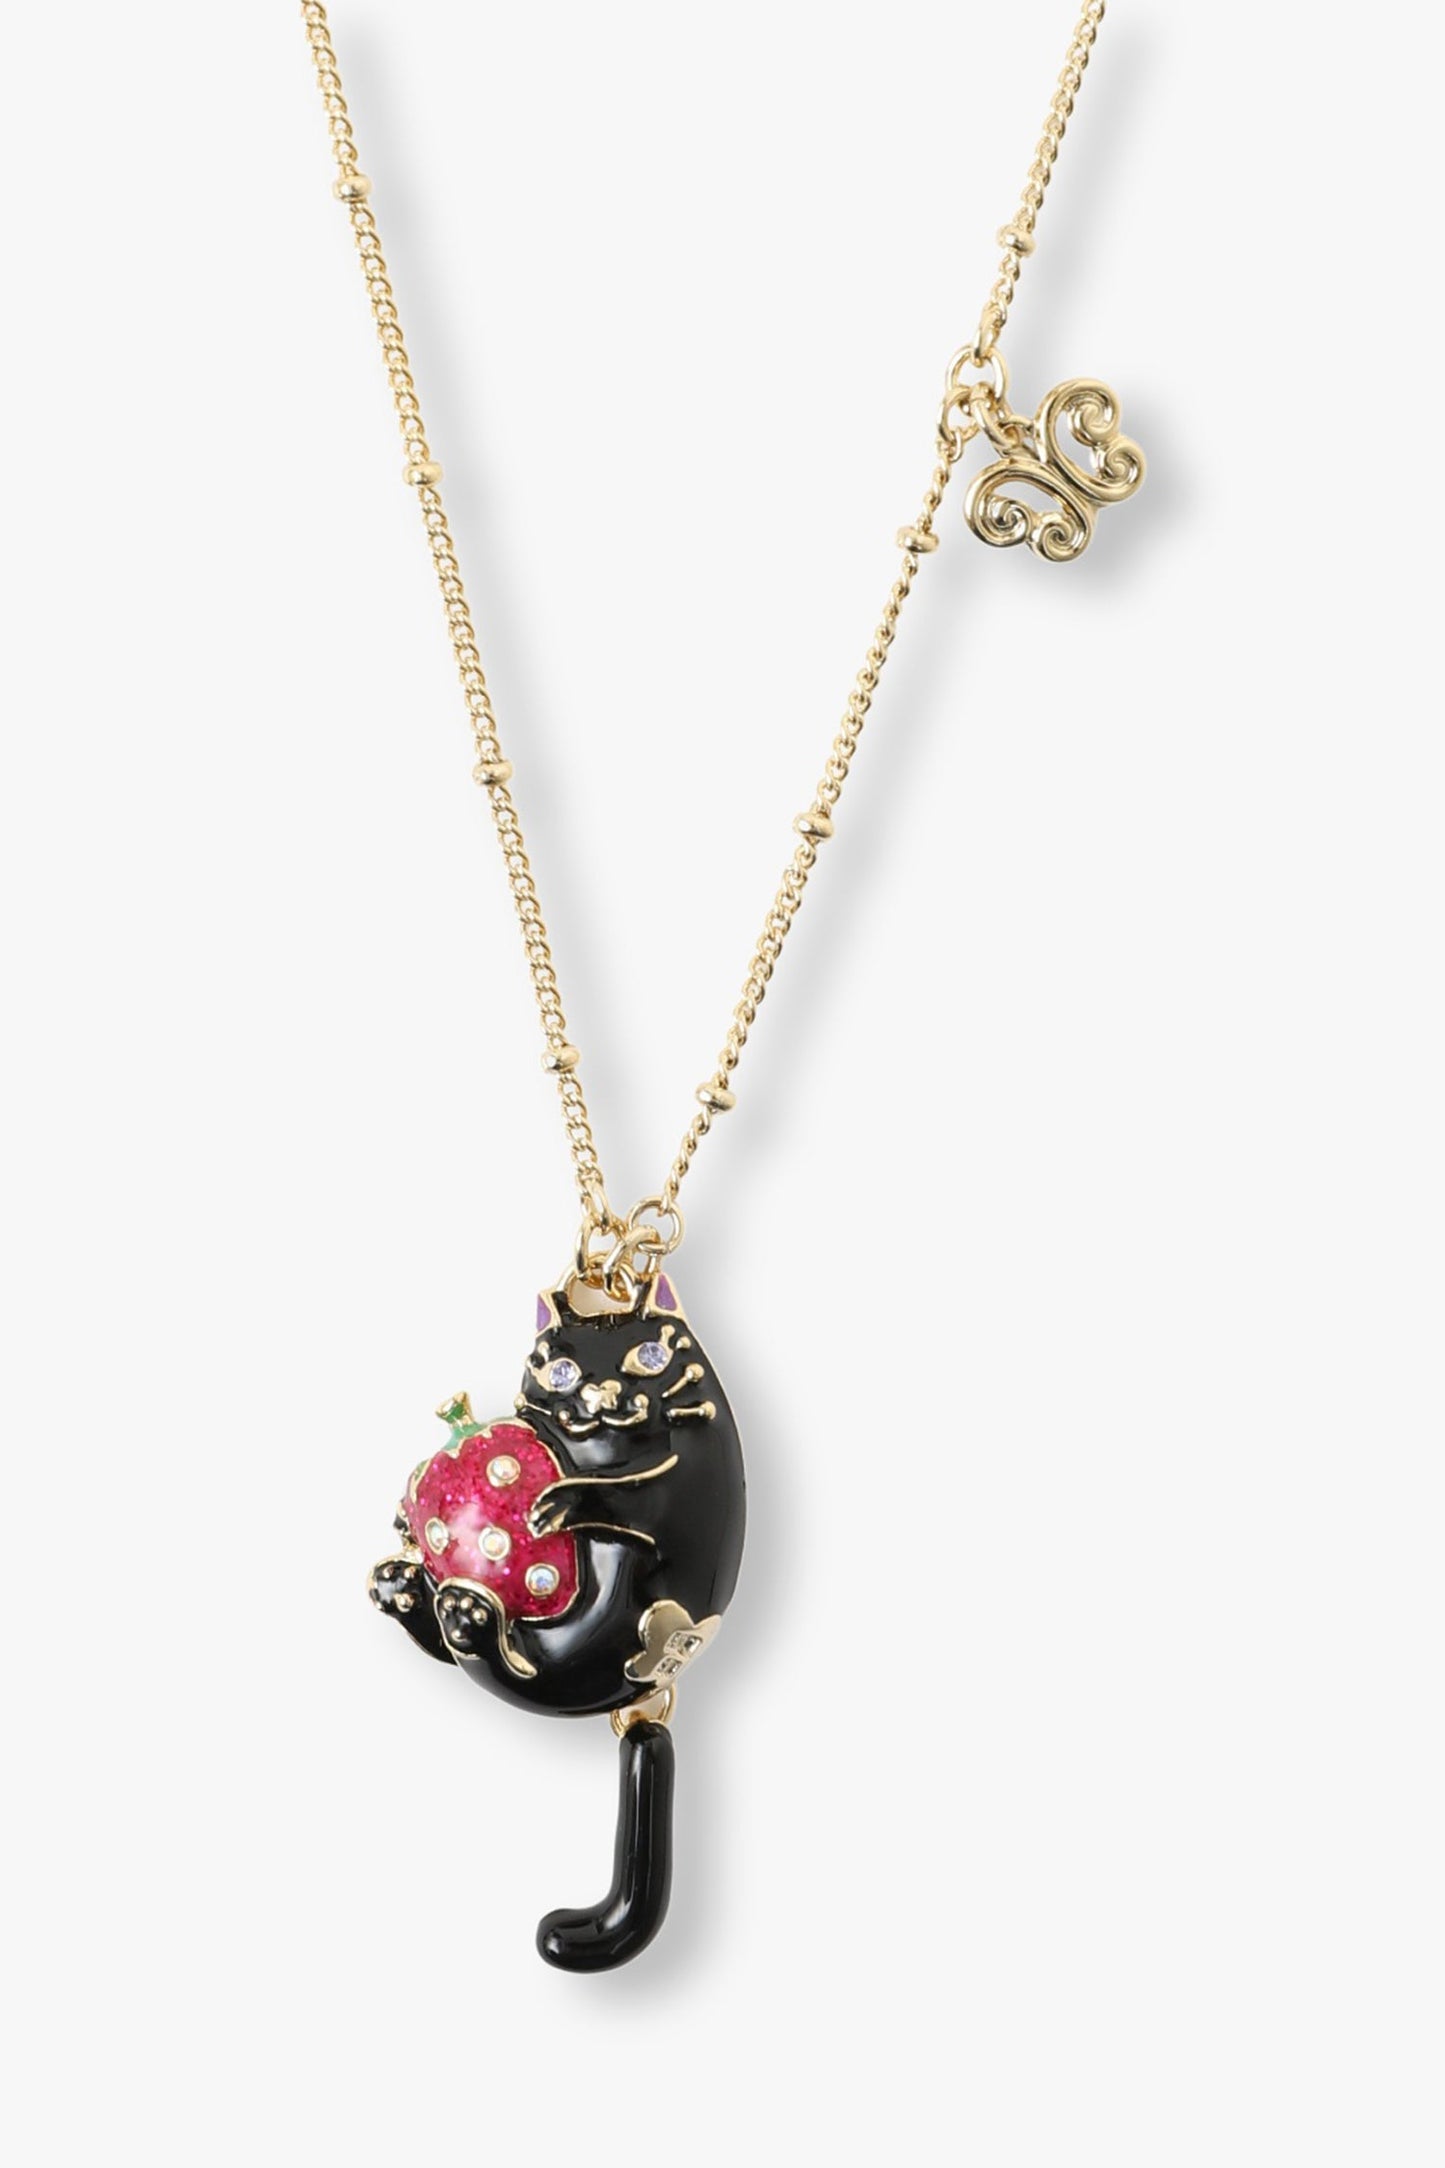 Yellow gold color plating edges on the black cat holding a strawberry, golden arabesque 